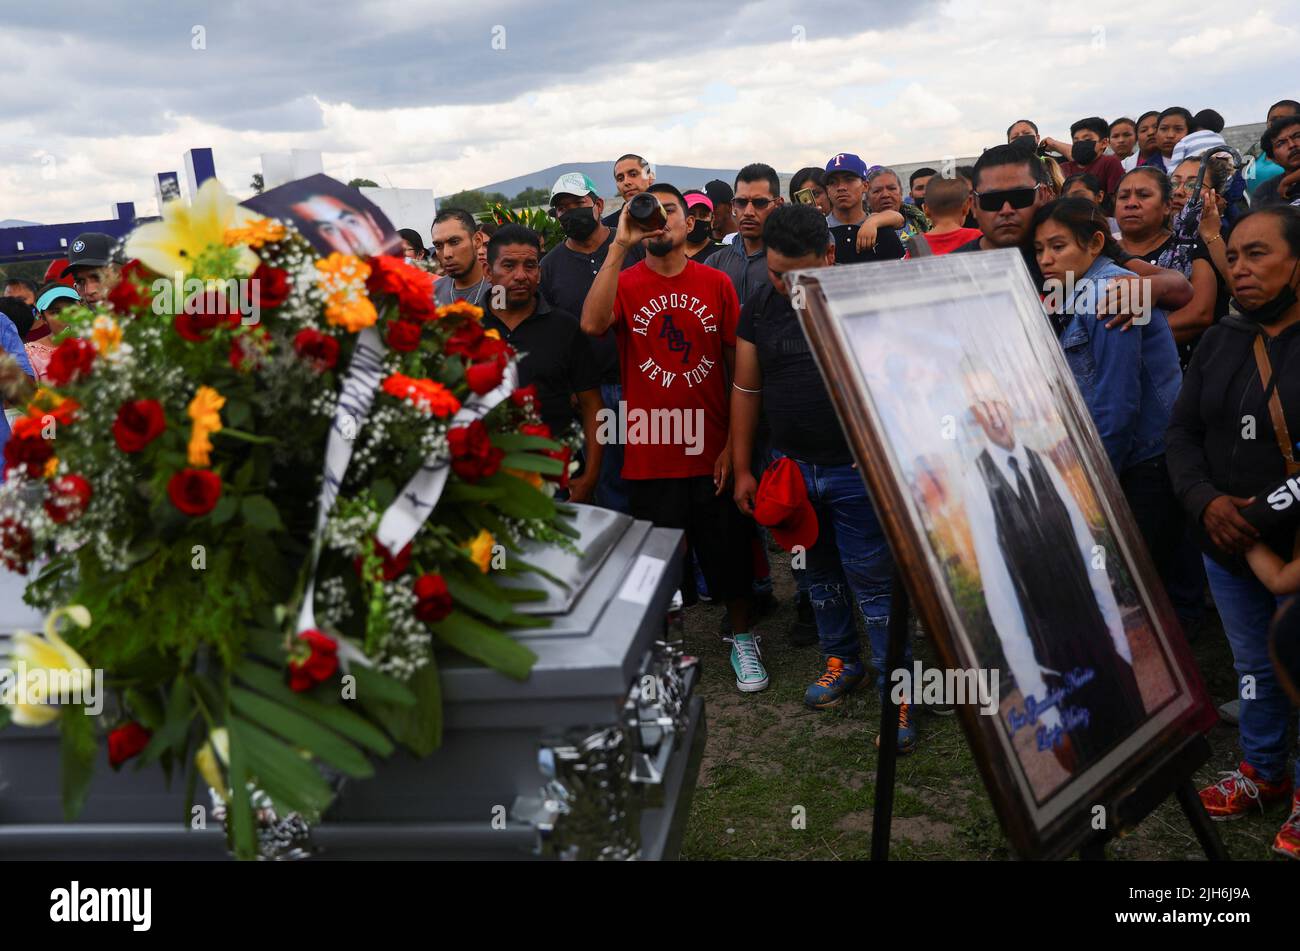 Relatives and friends of late migrant Jose Lopez, 34, who died in a trailer truck in Texas attend his funeral after his remains were repatriated to Mexico, in Celaya, Guanajuato state, Mexico, July 15, 2022. REUTERS/Edgard Garrido Stock Photo